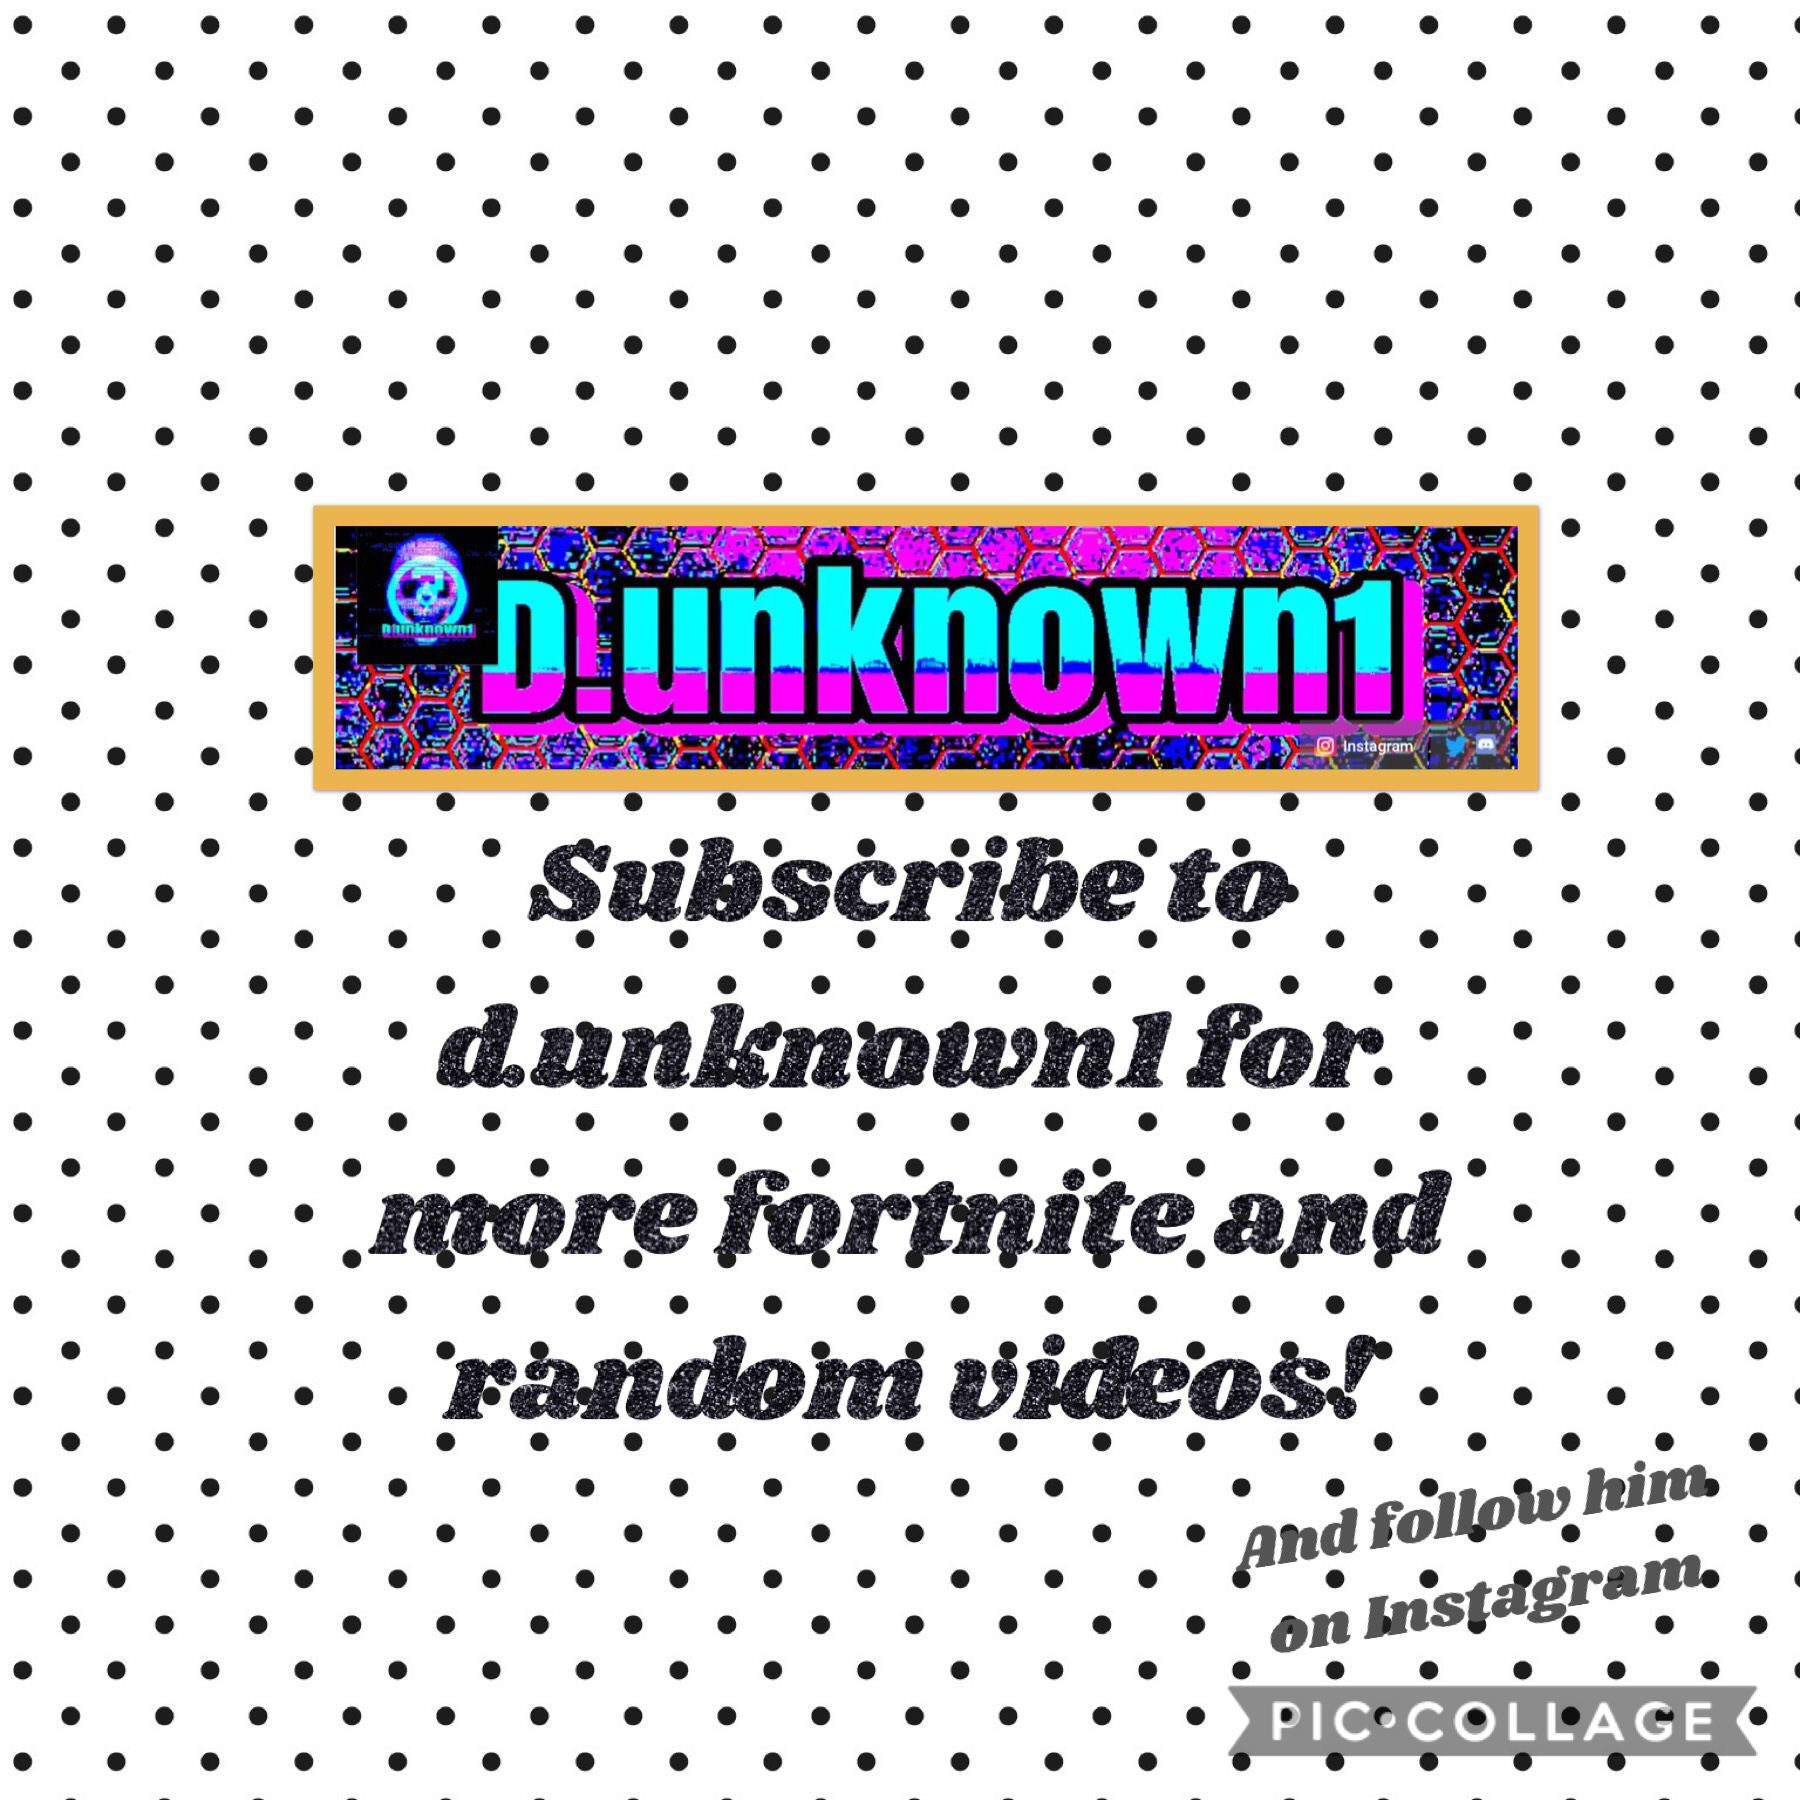 Subscribe to my friend d.unknown1 he has over 2000 followers on Instagram and he would love to make more on YouTube, subscribe and I’ll give you a shoutout and spam your page with likes! 😊😊😊